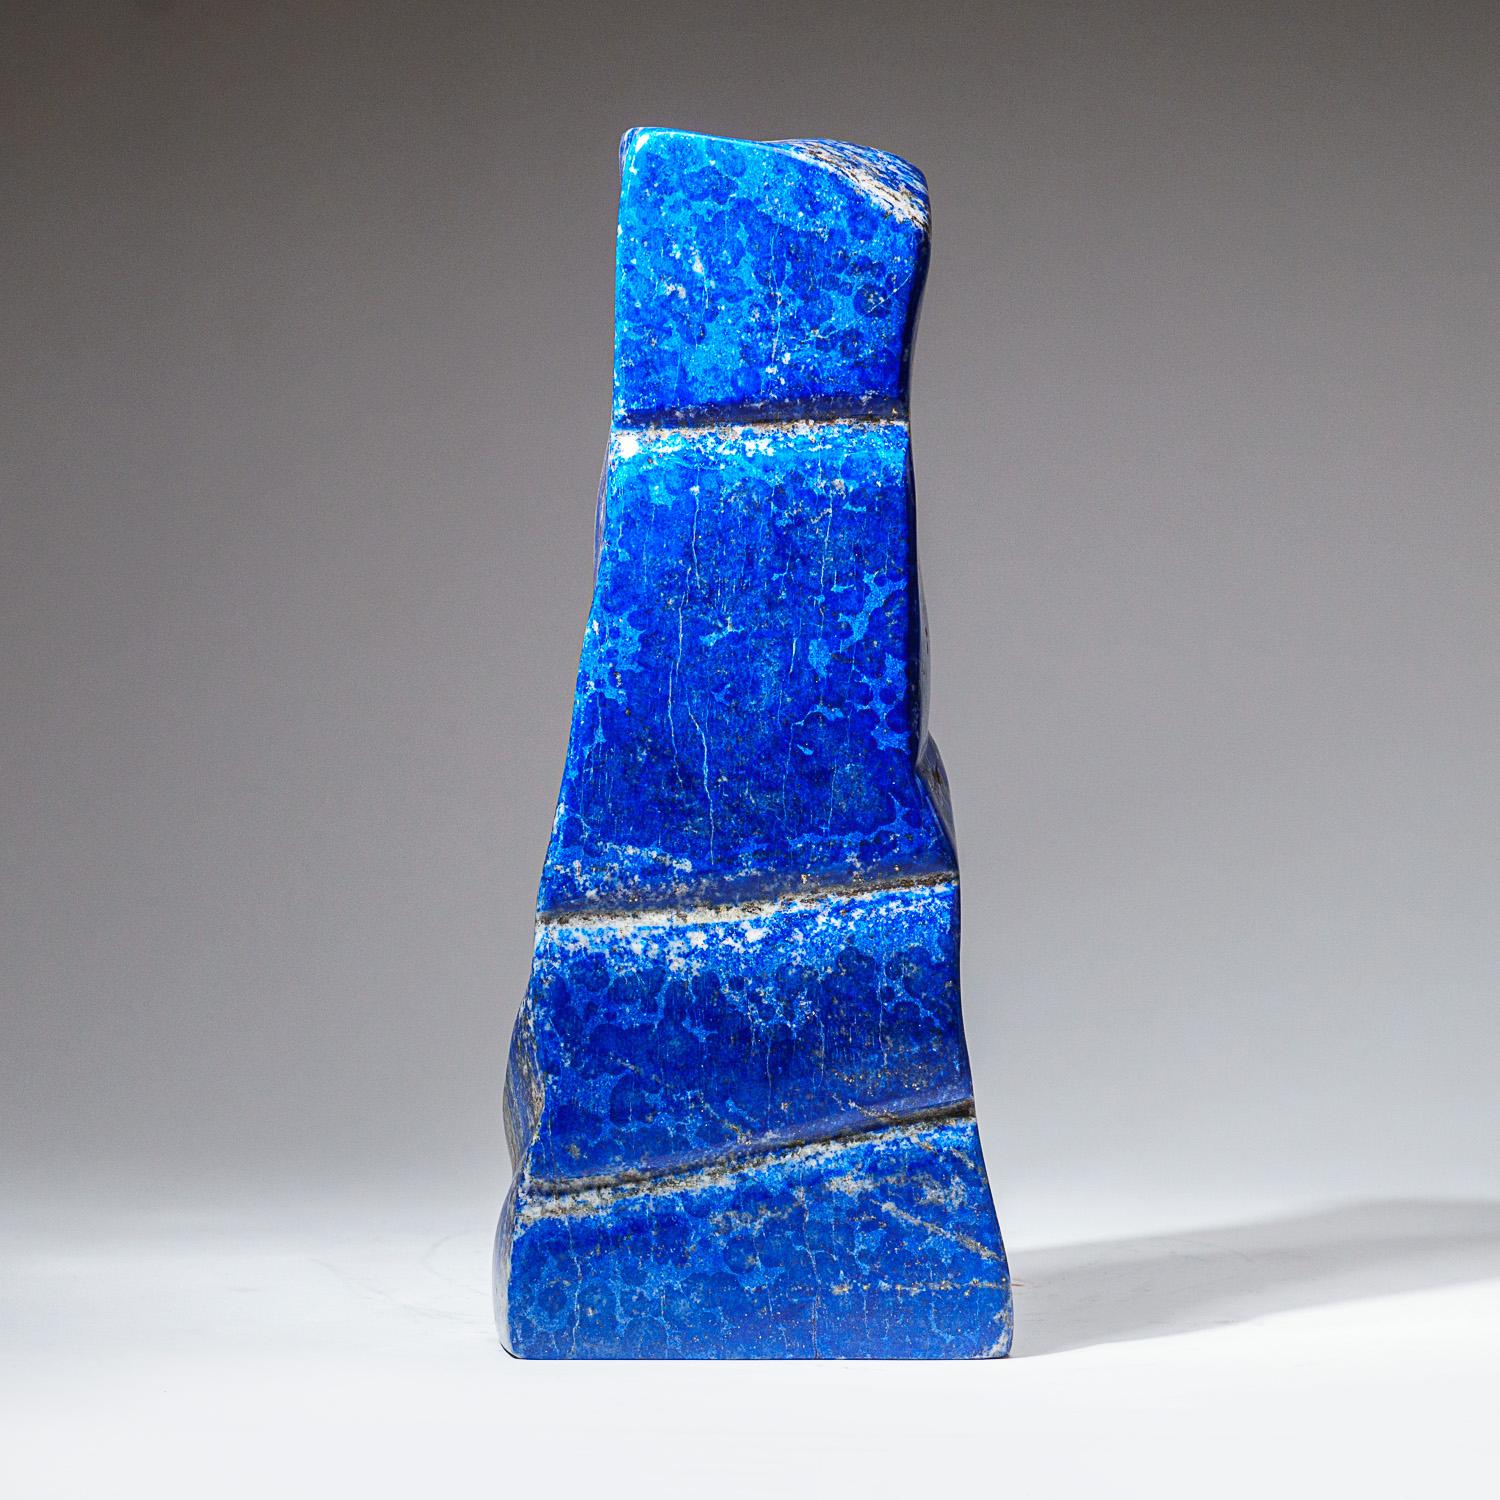 Rock Crystal Genuine Polished Lapis Lazuli Freeform from Afghanistan, '6.5 Lbs' For Sale